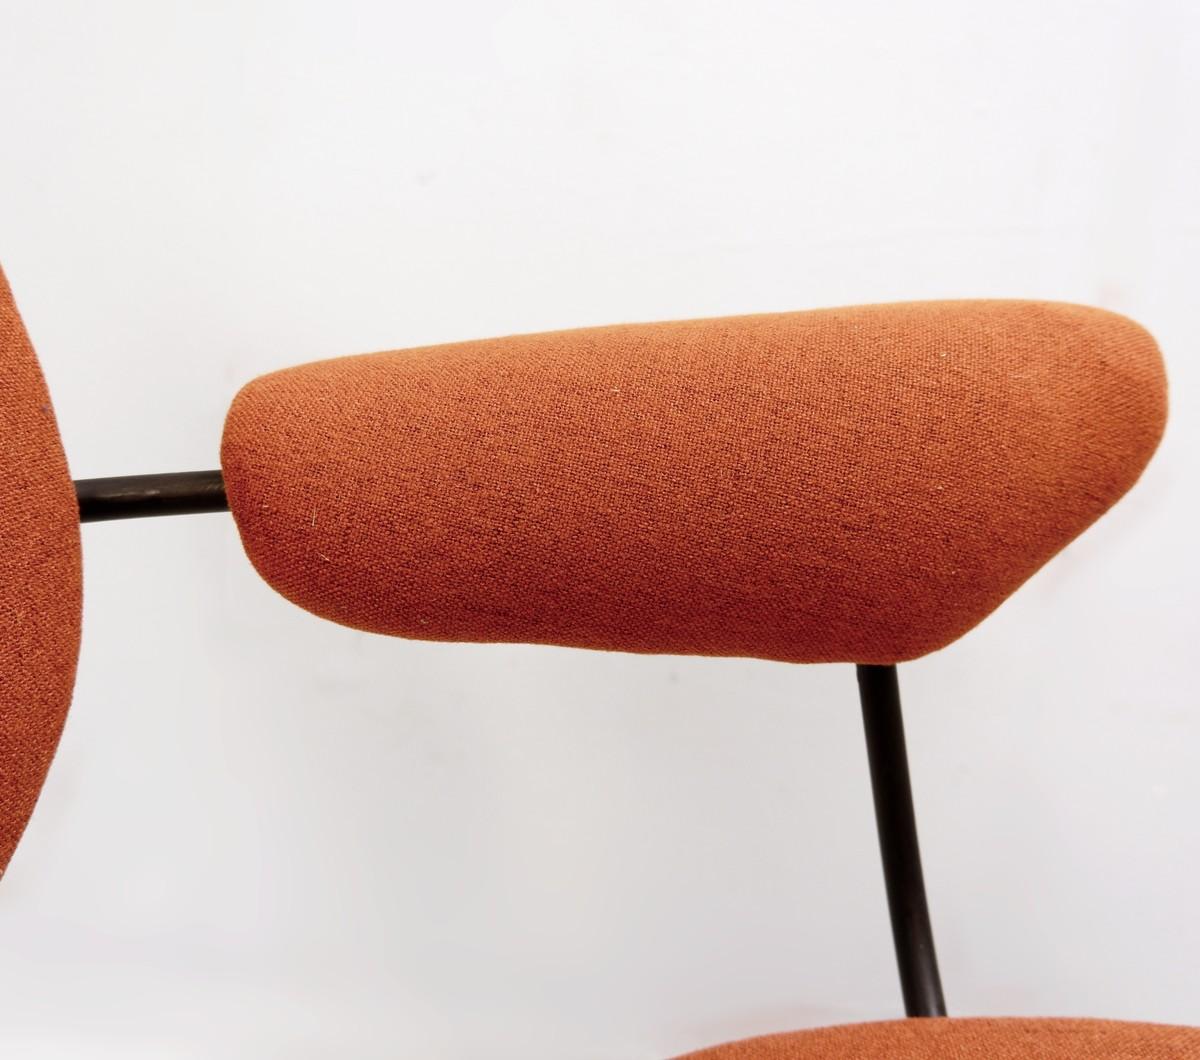 302 Armchairs by Willem Hendrik Gispen for Kembo, 1950s For Sale 2